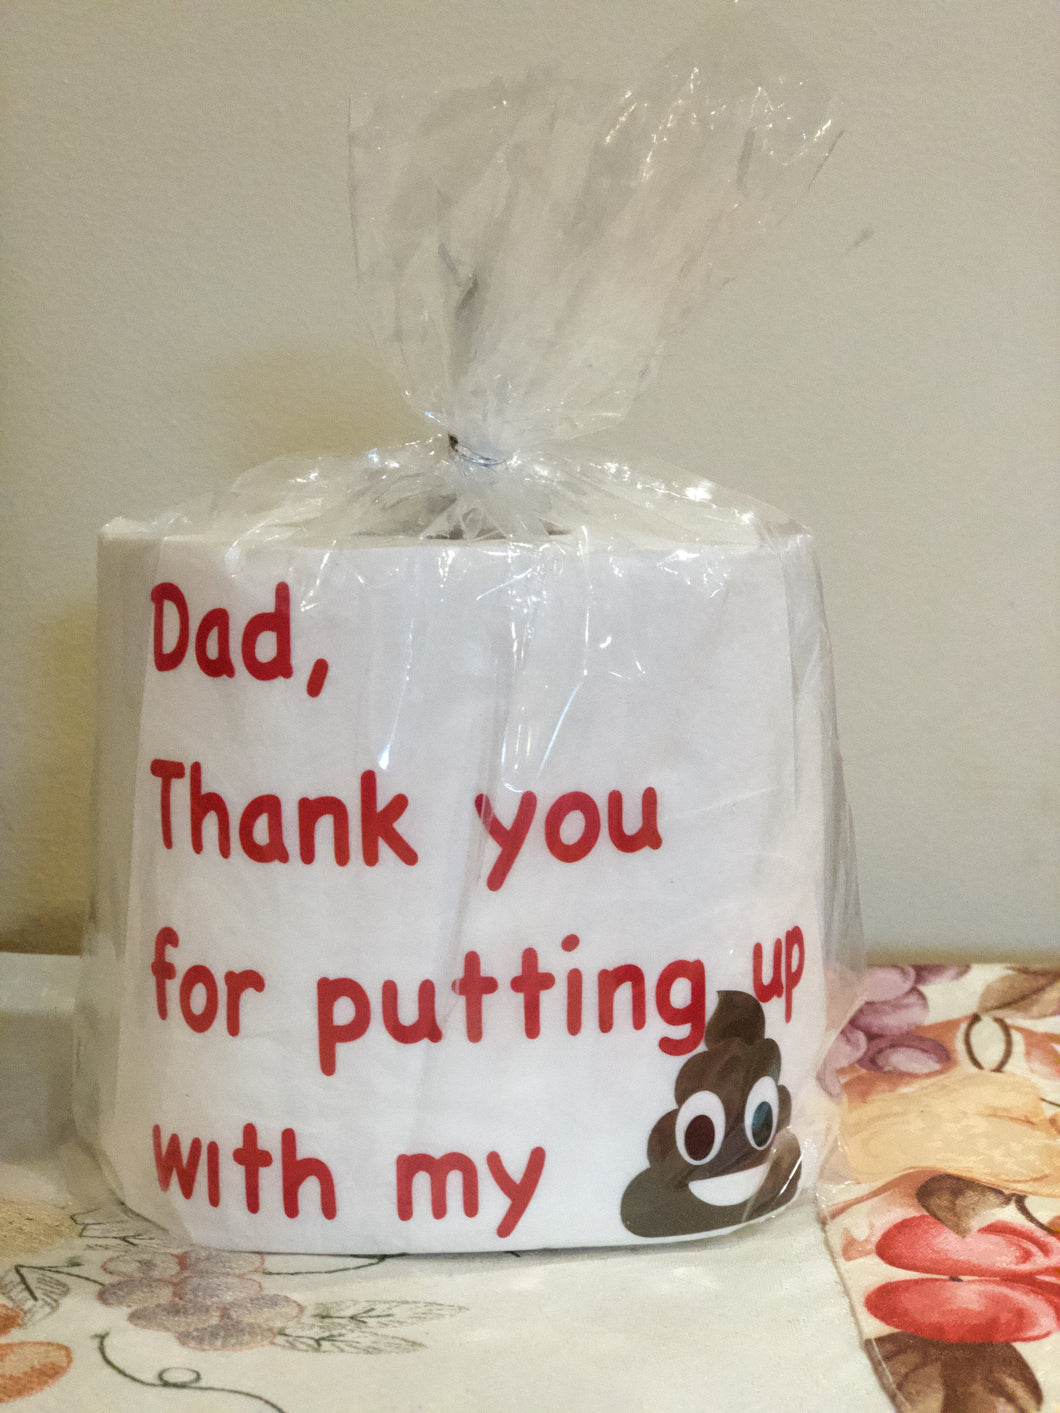 Dad Birthday Toilet Paper, Dad Birthday Gag Gift, Funny TP, Gag Gift, Dad Thank you for putting up with Poop Emoji out of you Funny TP Roll